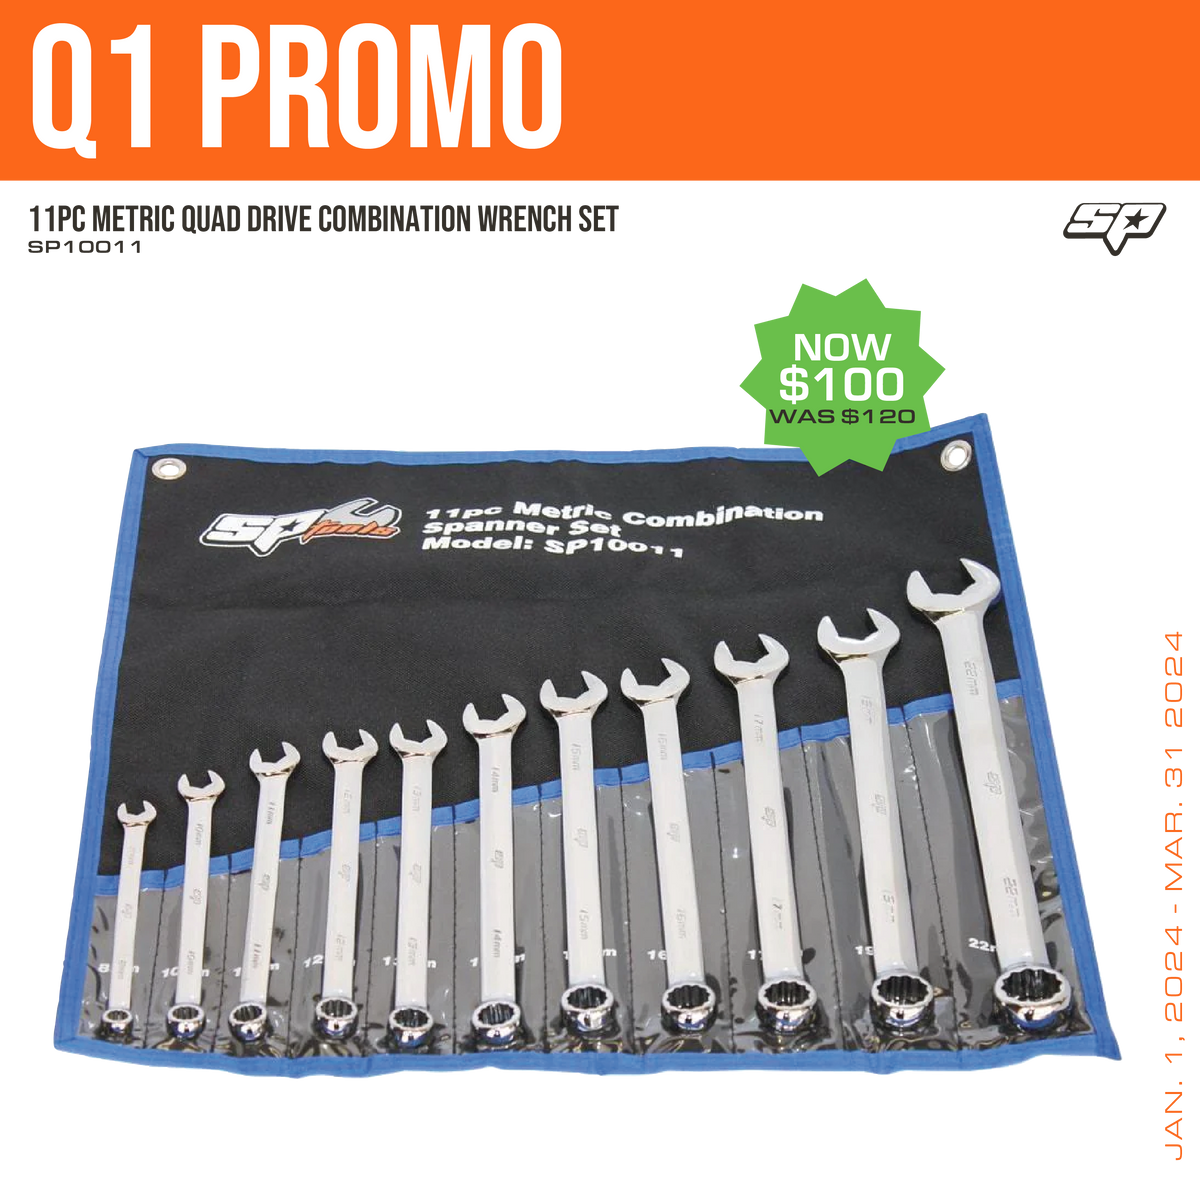 New products - SP Tools